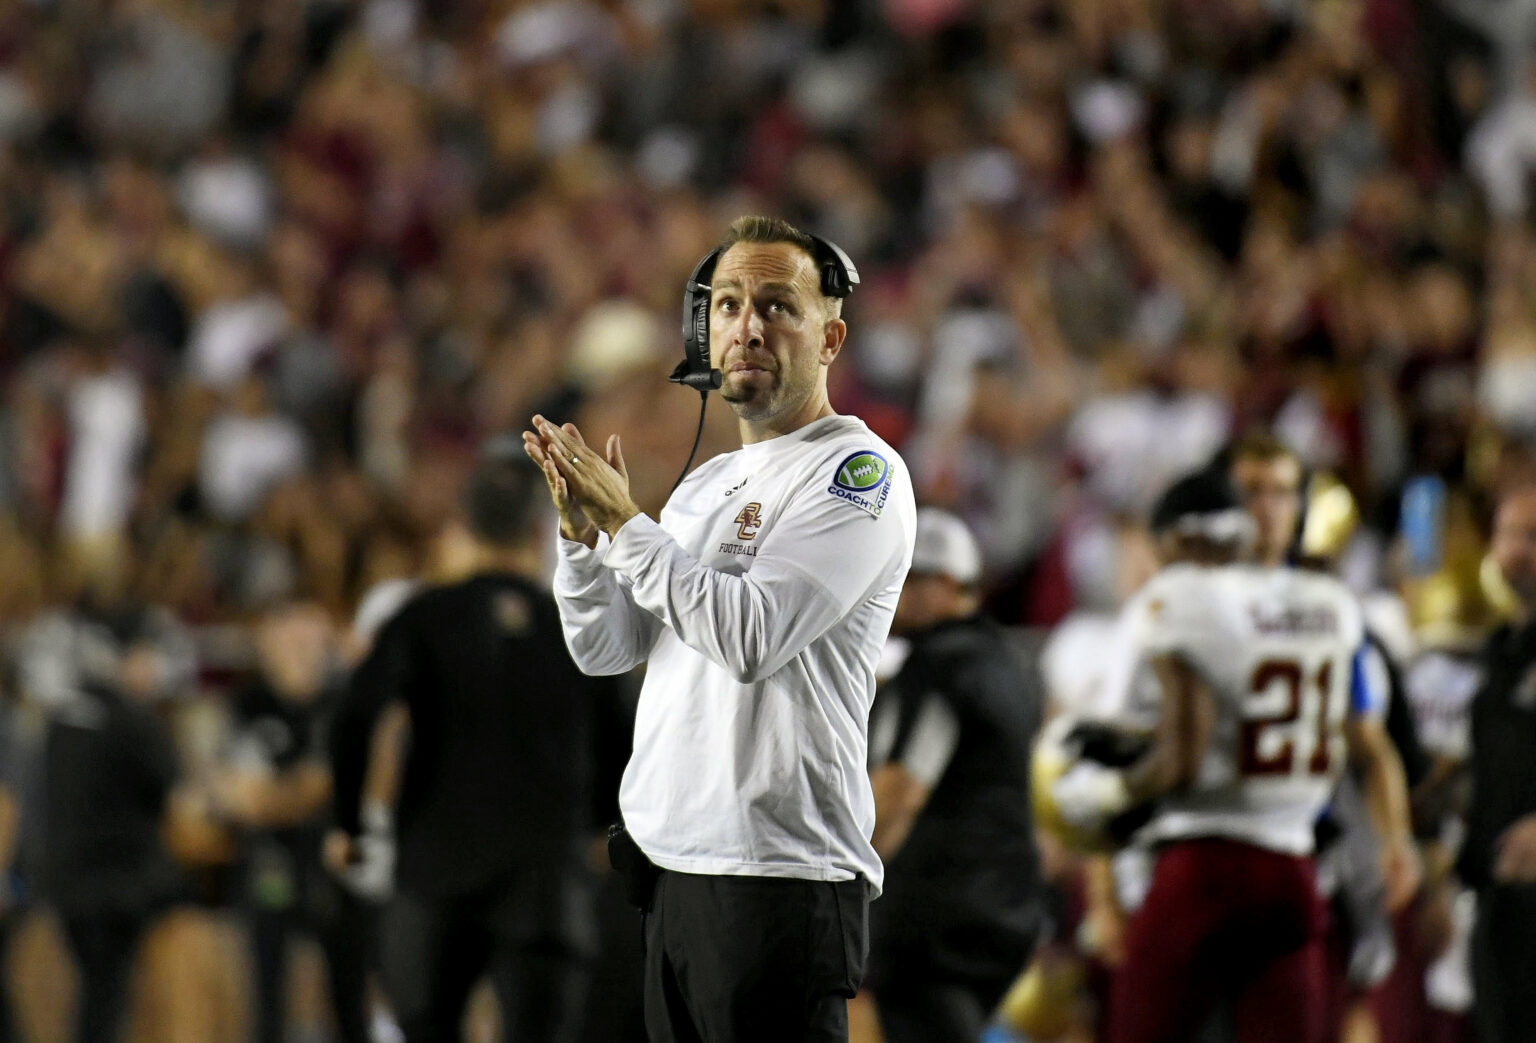 Sep 24, 2022; Tallahassee, Florida, USA; Boston College Eagles head coach Jeff Hafley looks on during the second half against the Florida State Seminoles at Doak S. Campbell Stadium. Mandatory Credit: Melina Myers-USA TODAY Sports